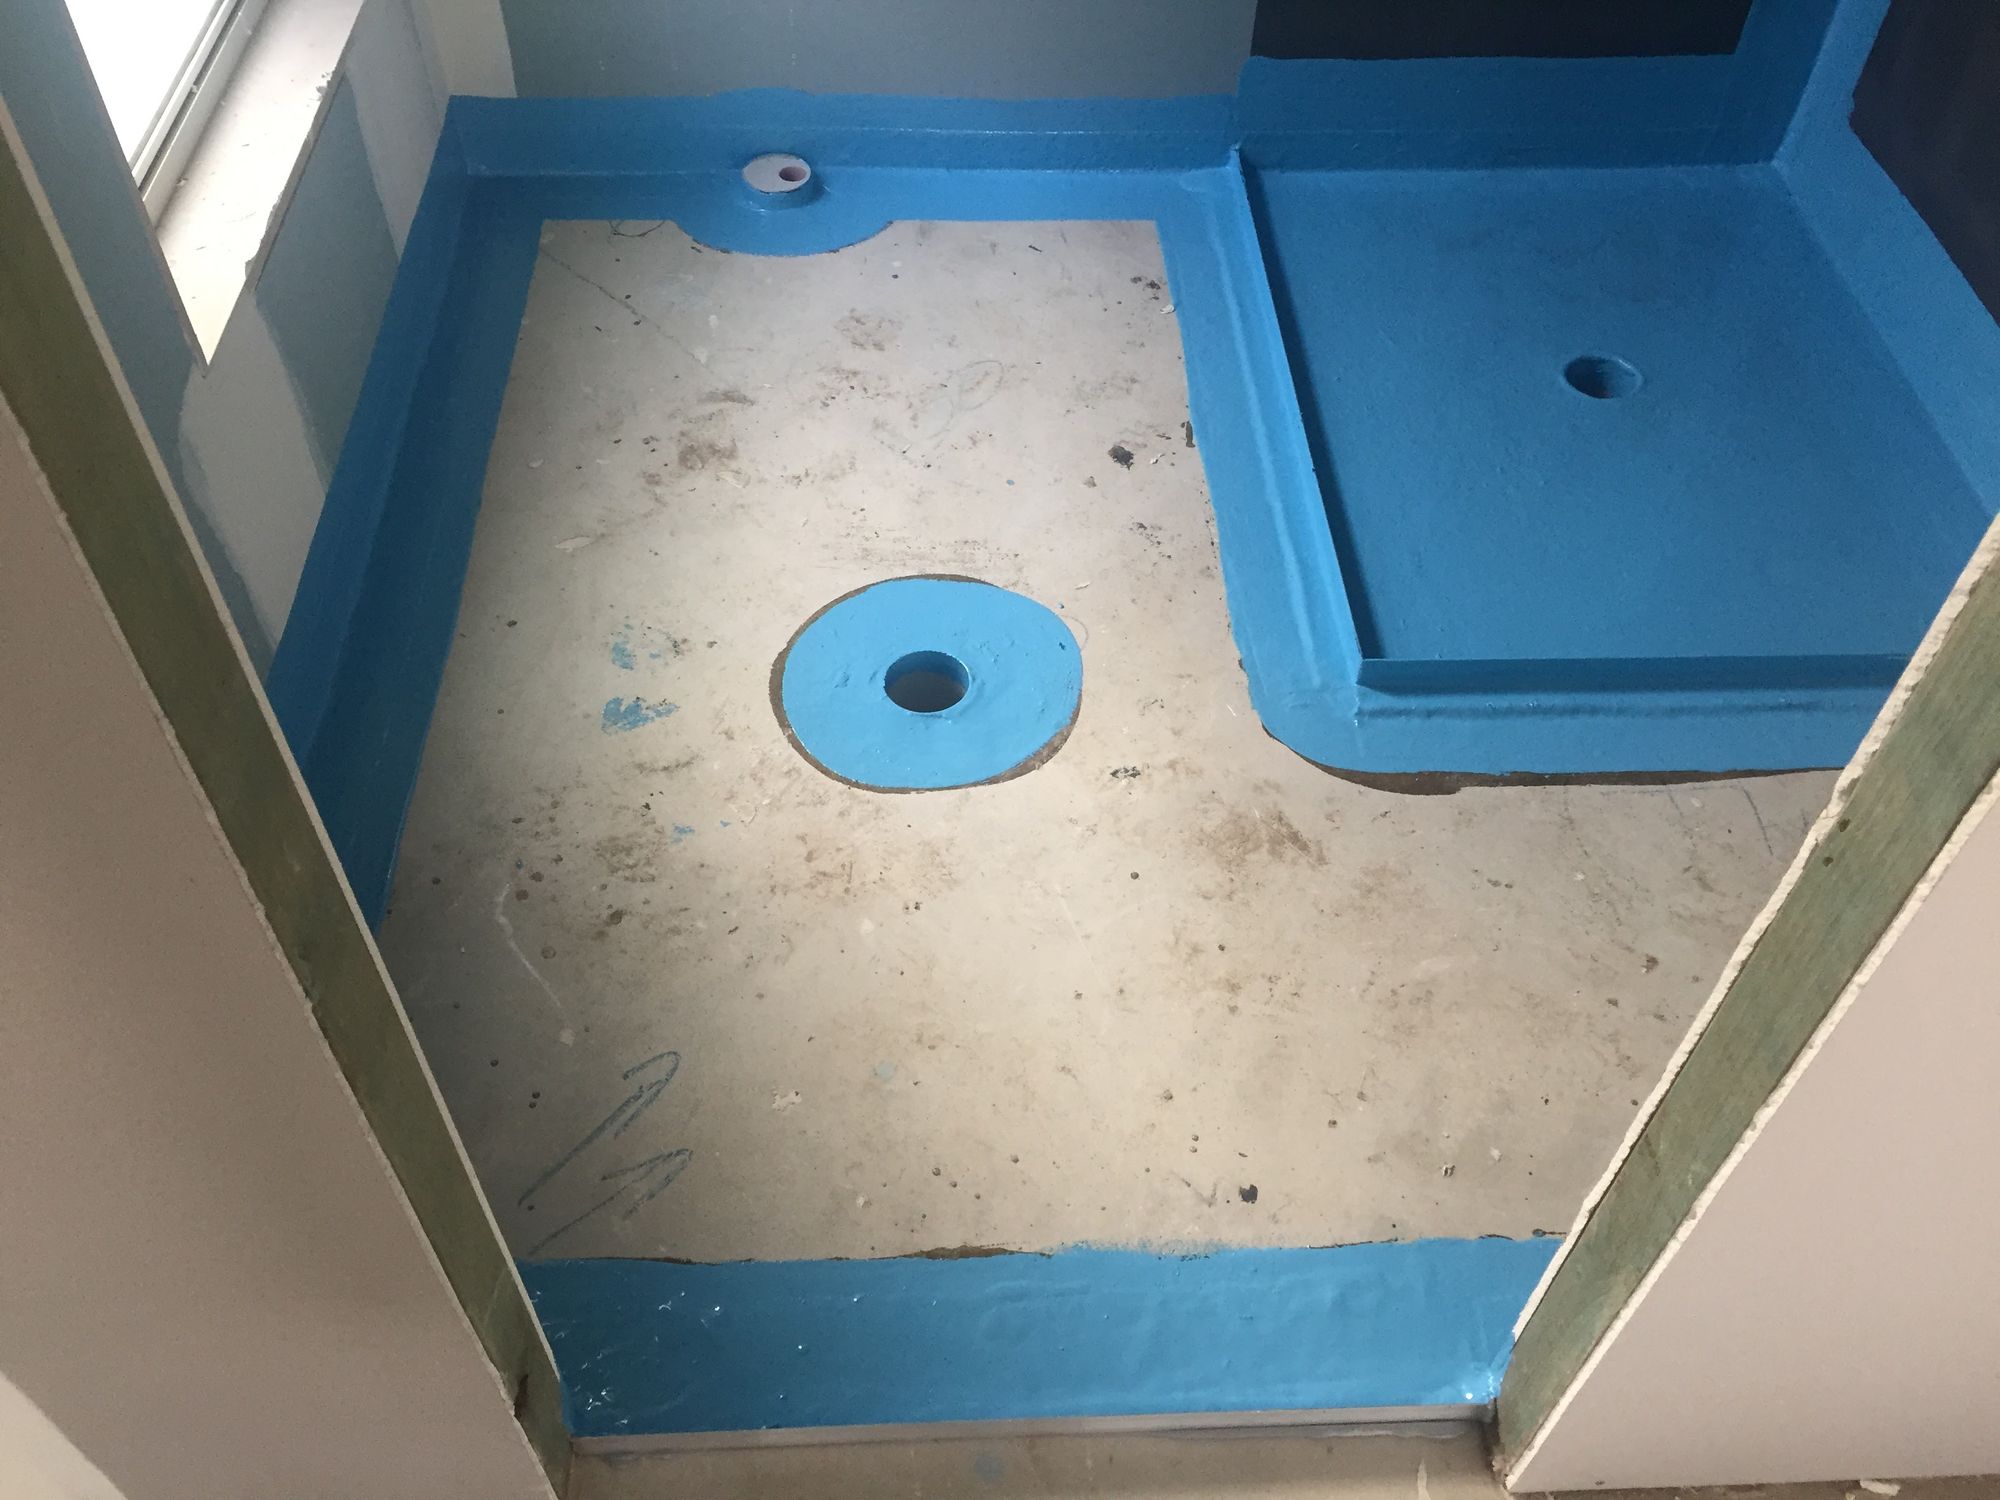 A Beginner's Guide to Waterproofing Wet Areas